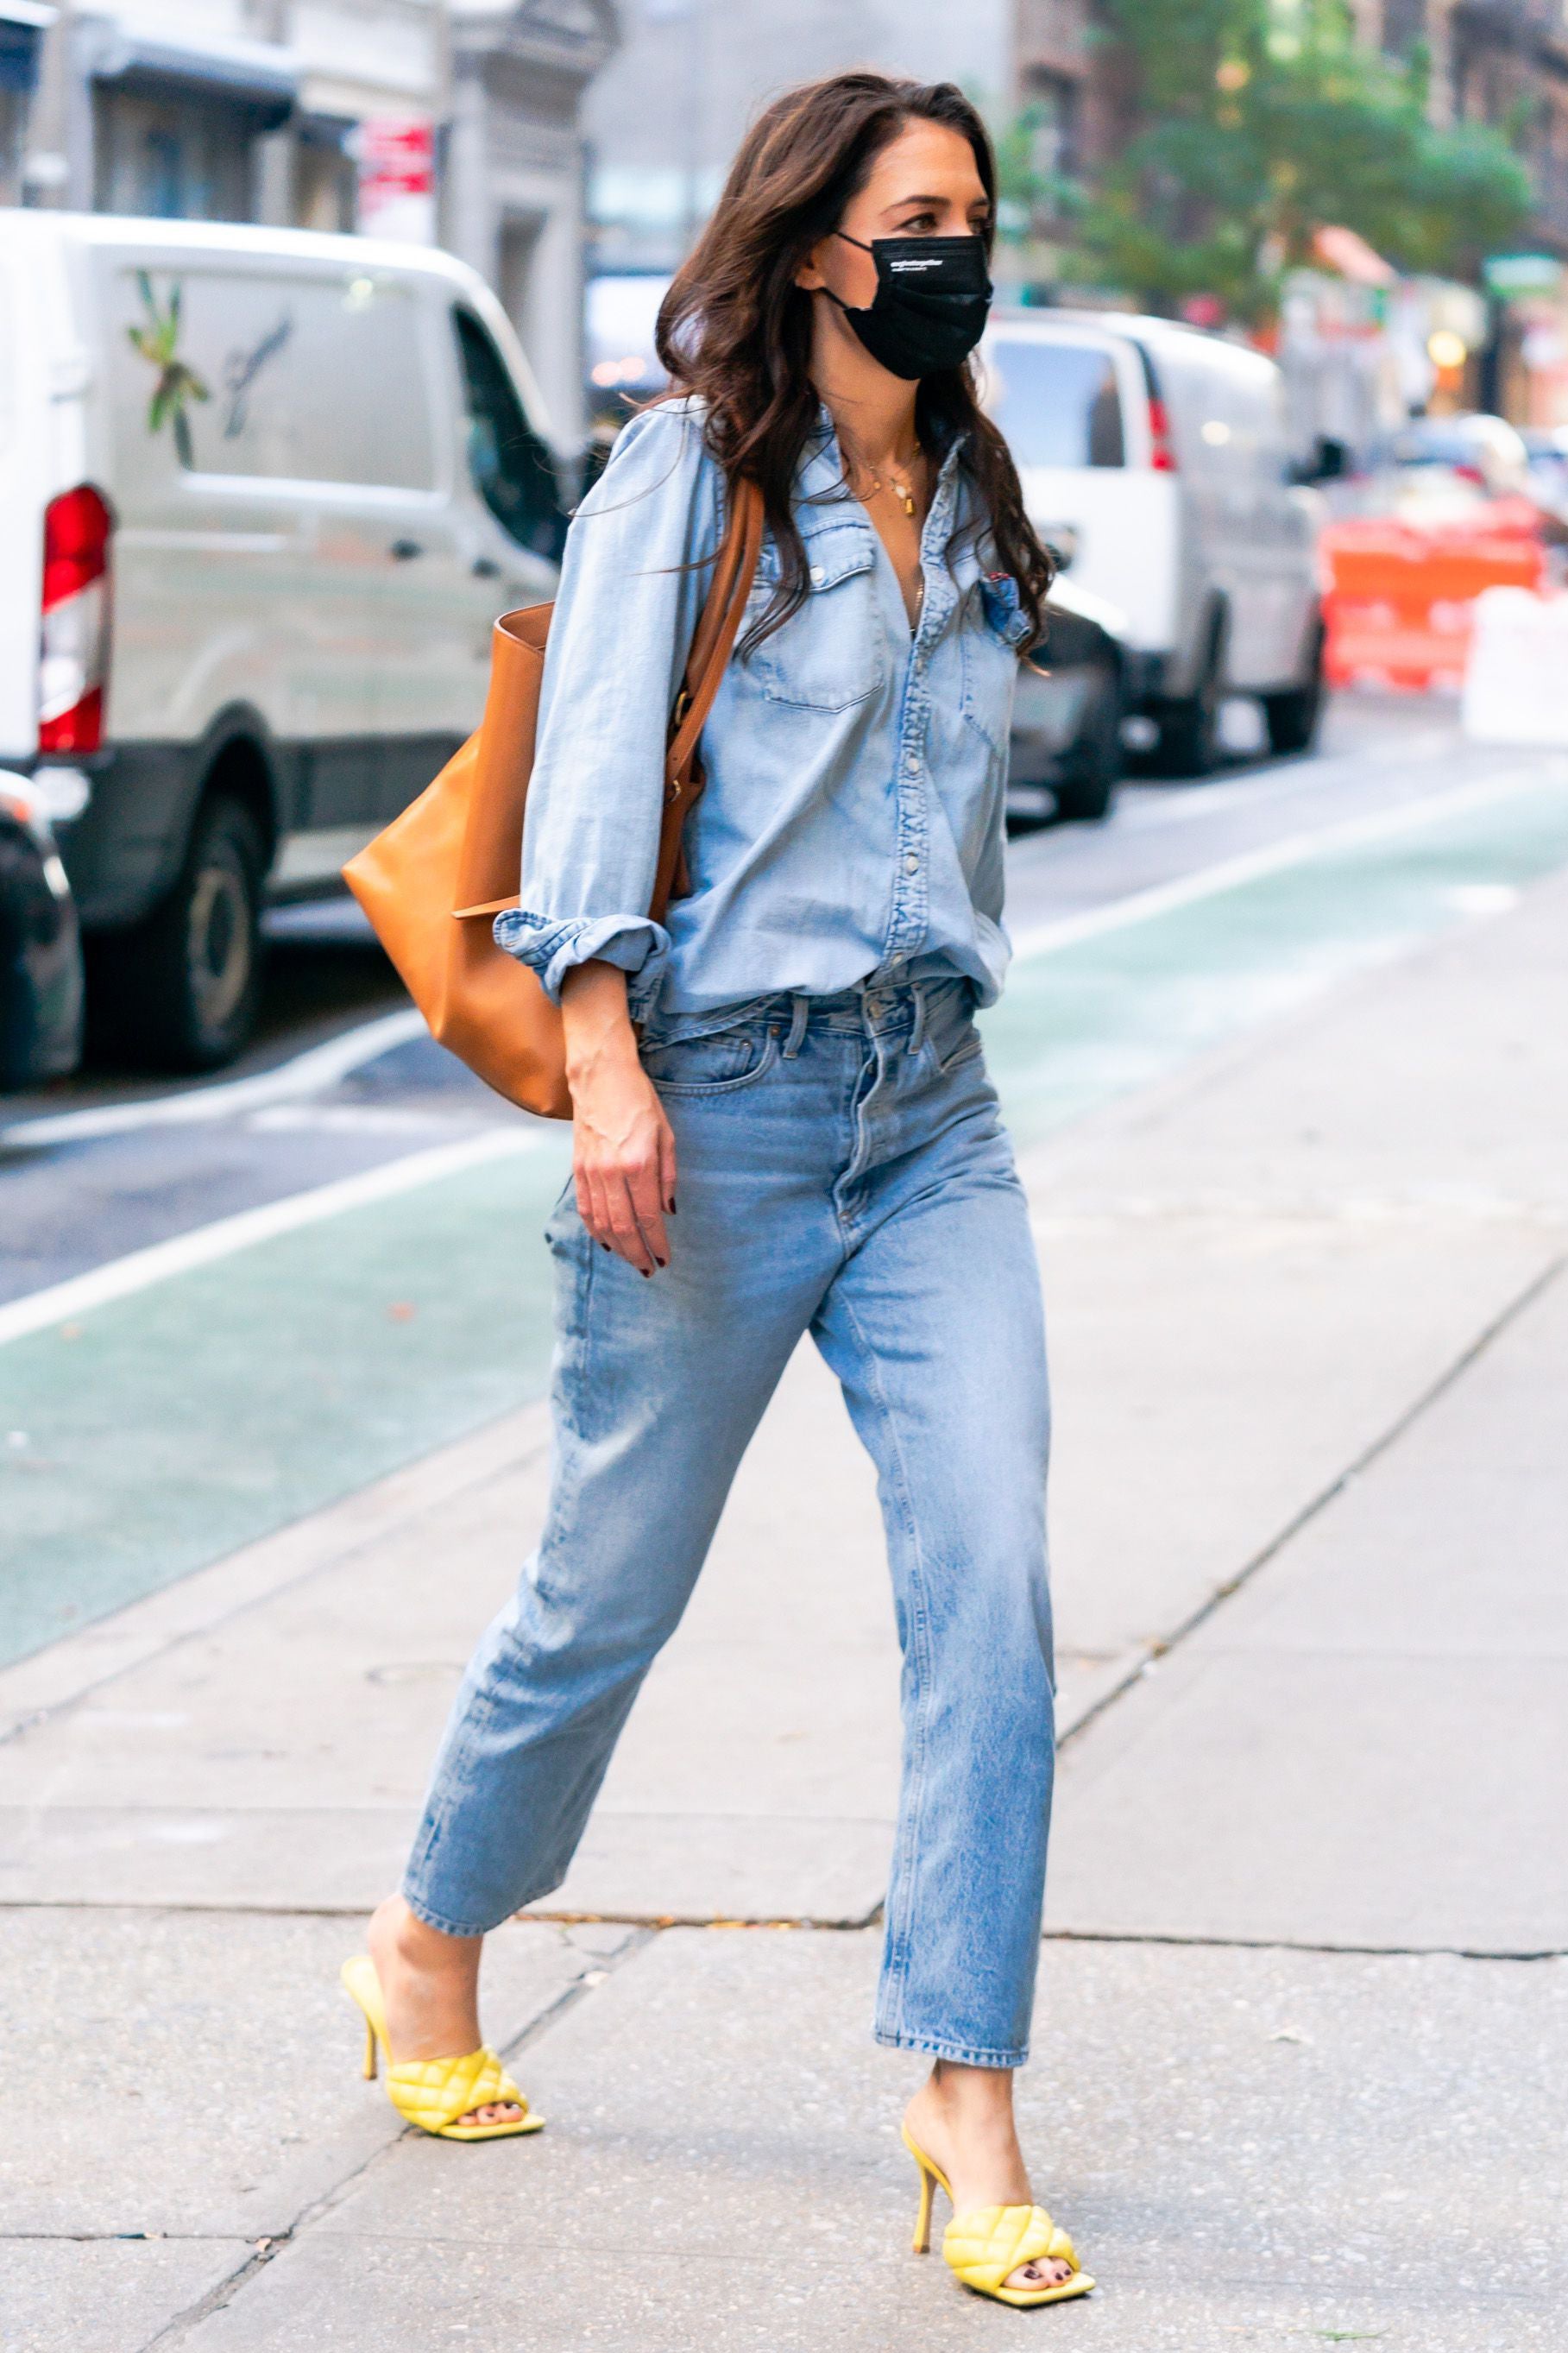 Katie Double Denim & Heels Outfit Is So Chic